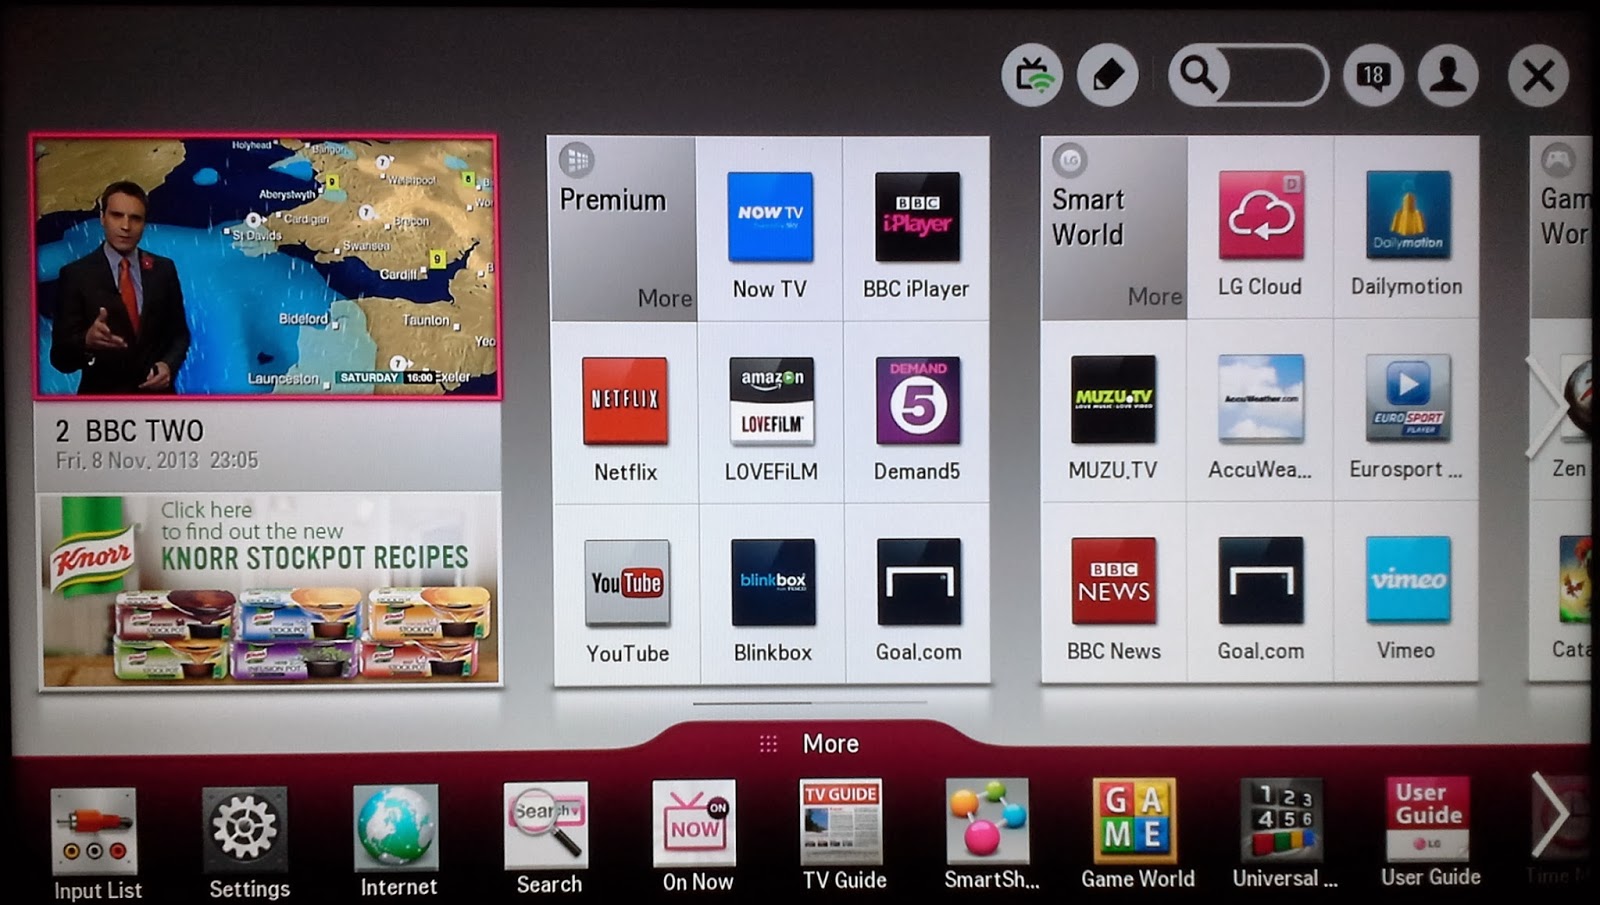 Doctorbeet S Blog Lg Smart Tvs Logging Usb Filenames And Viewing Info To Lg Servers